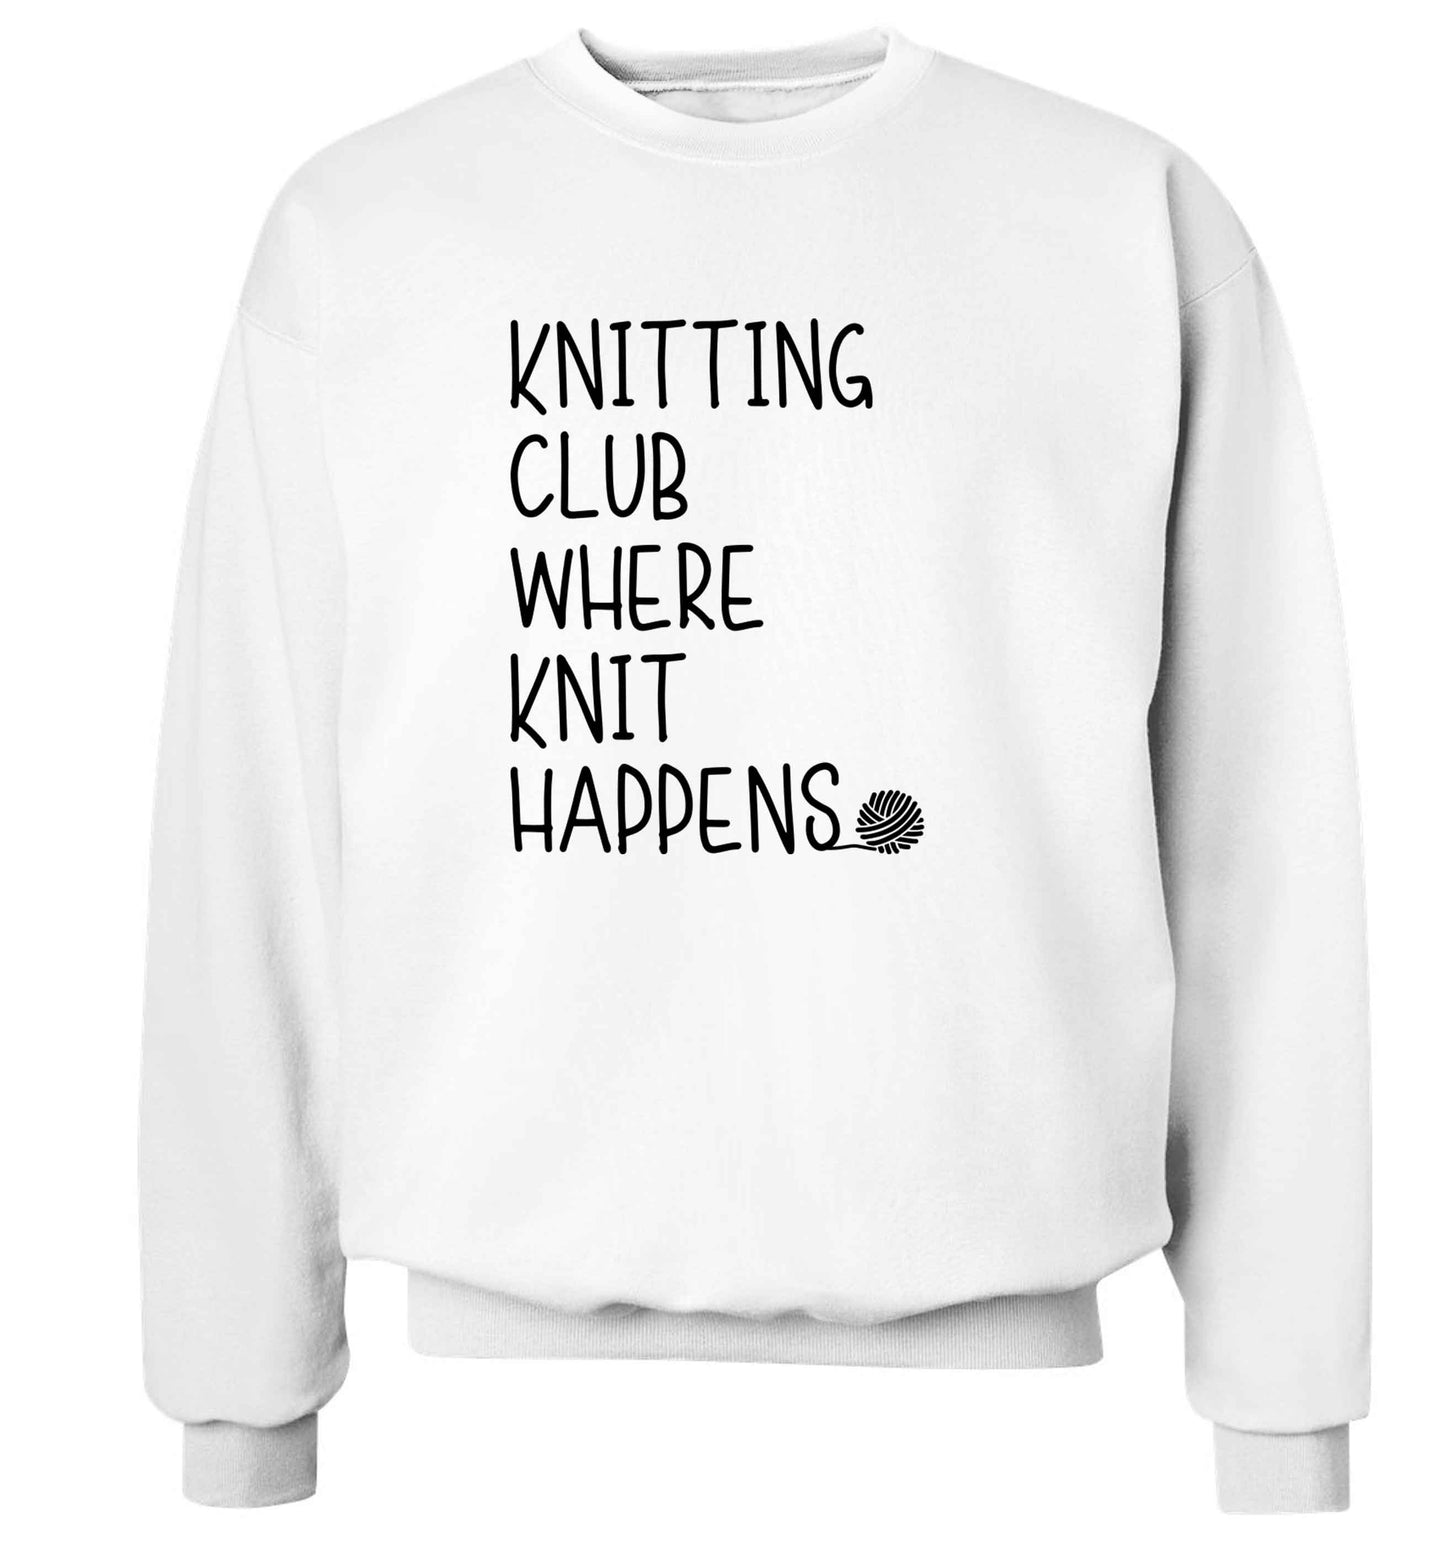 Knitting club where knit happens adult's unisex white sweater 2XL